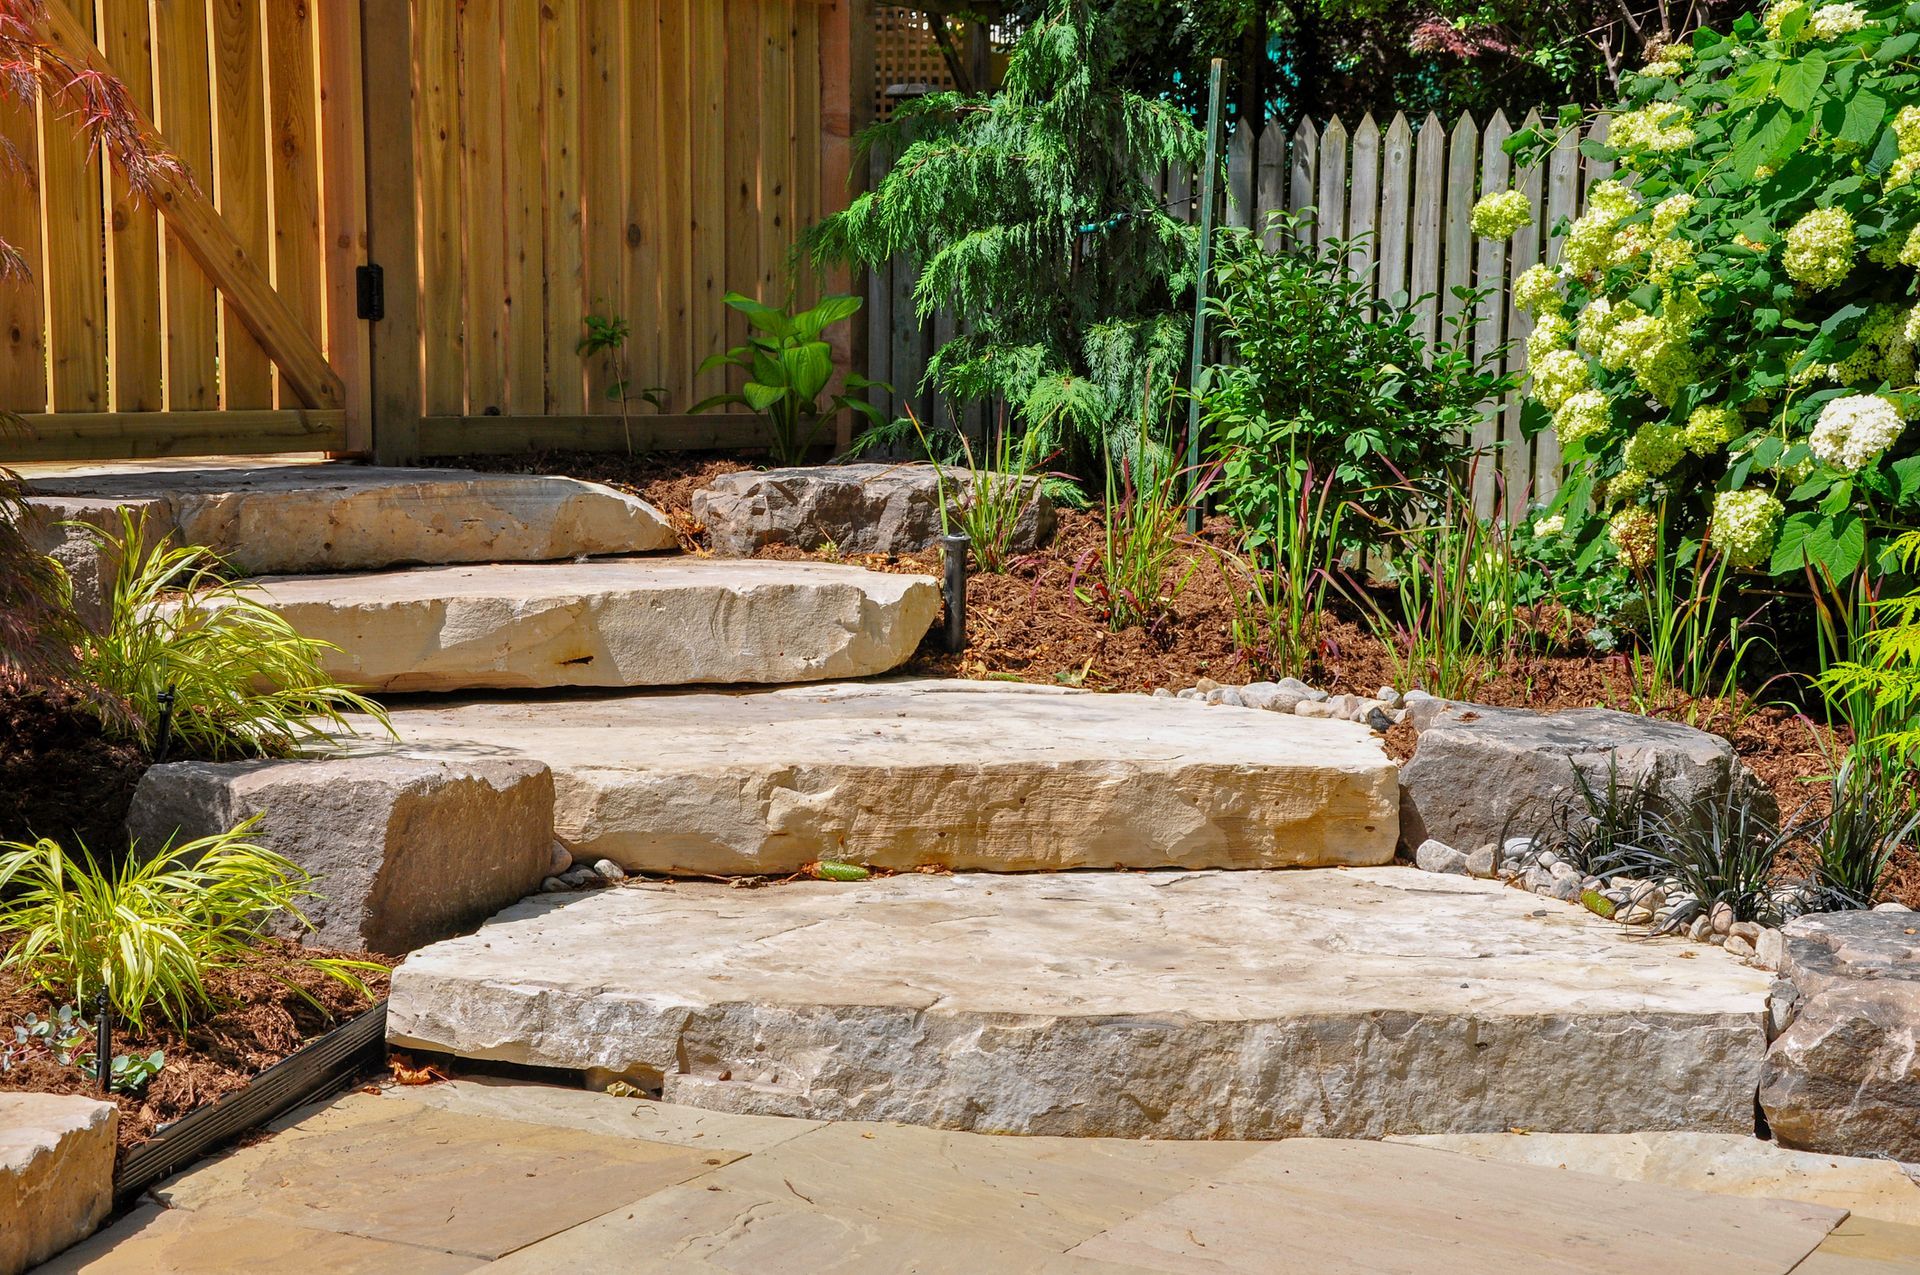 A Stone Staircase Leading up To a Wooden Fence in A Garden - Kinston, NC - Garden Gator Landscape & Design